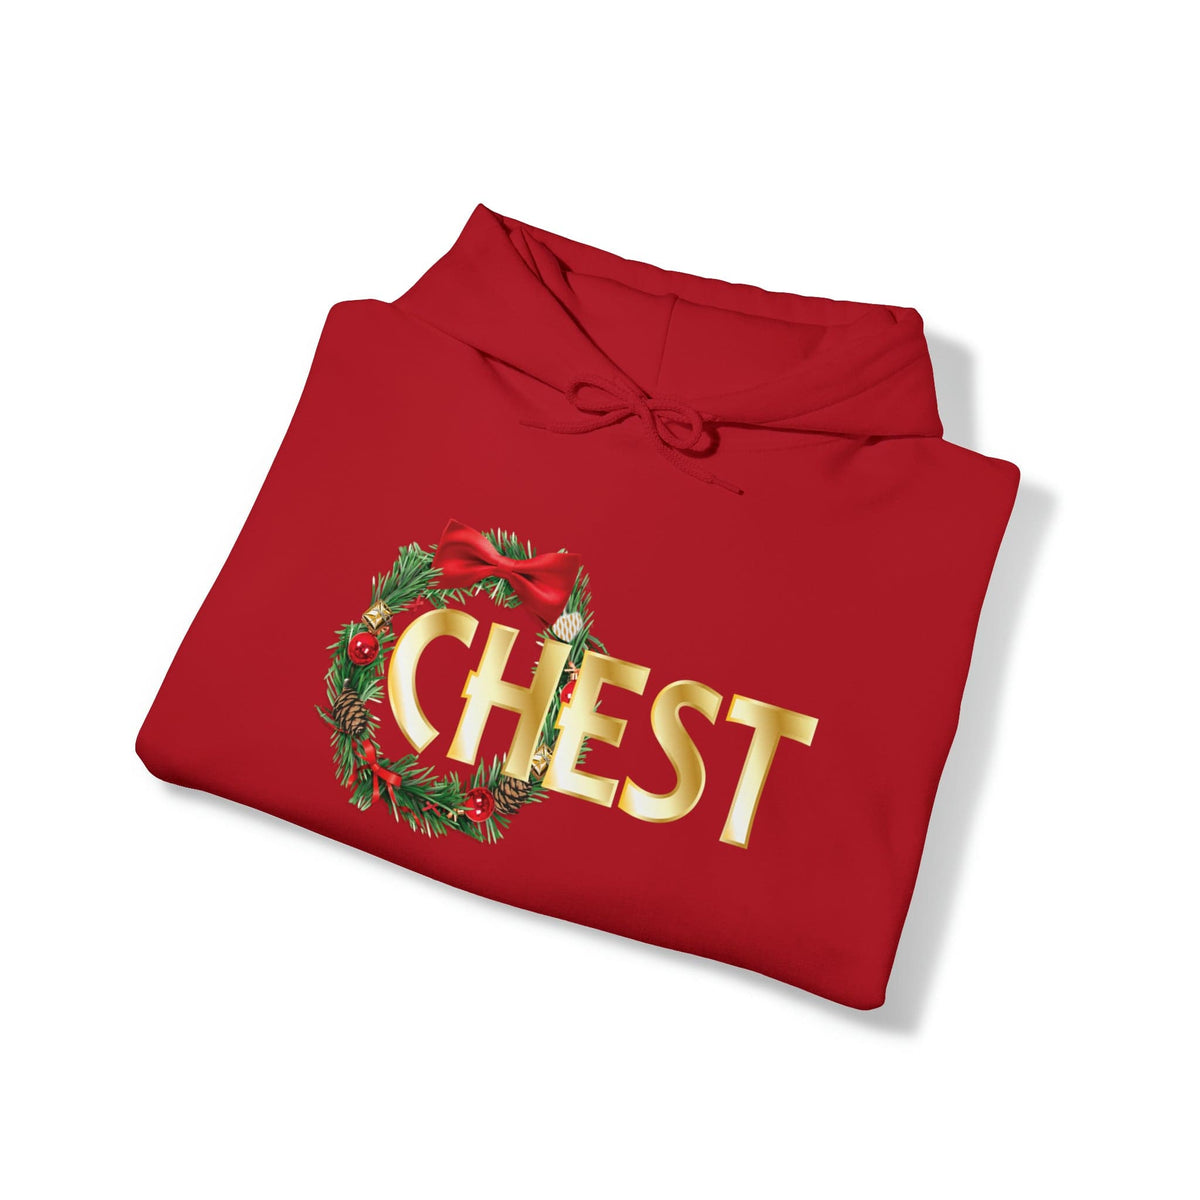 Chestnuts Holiday Hoodies